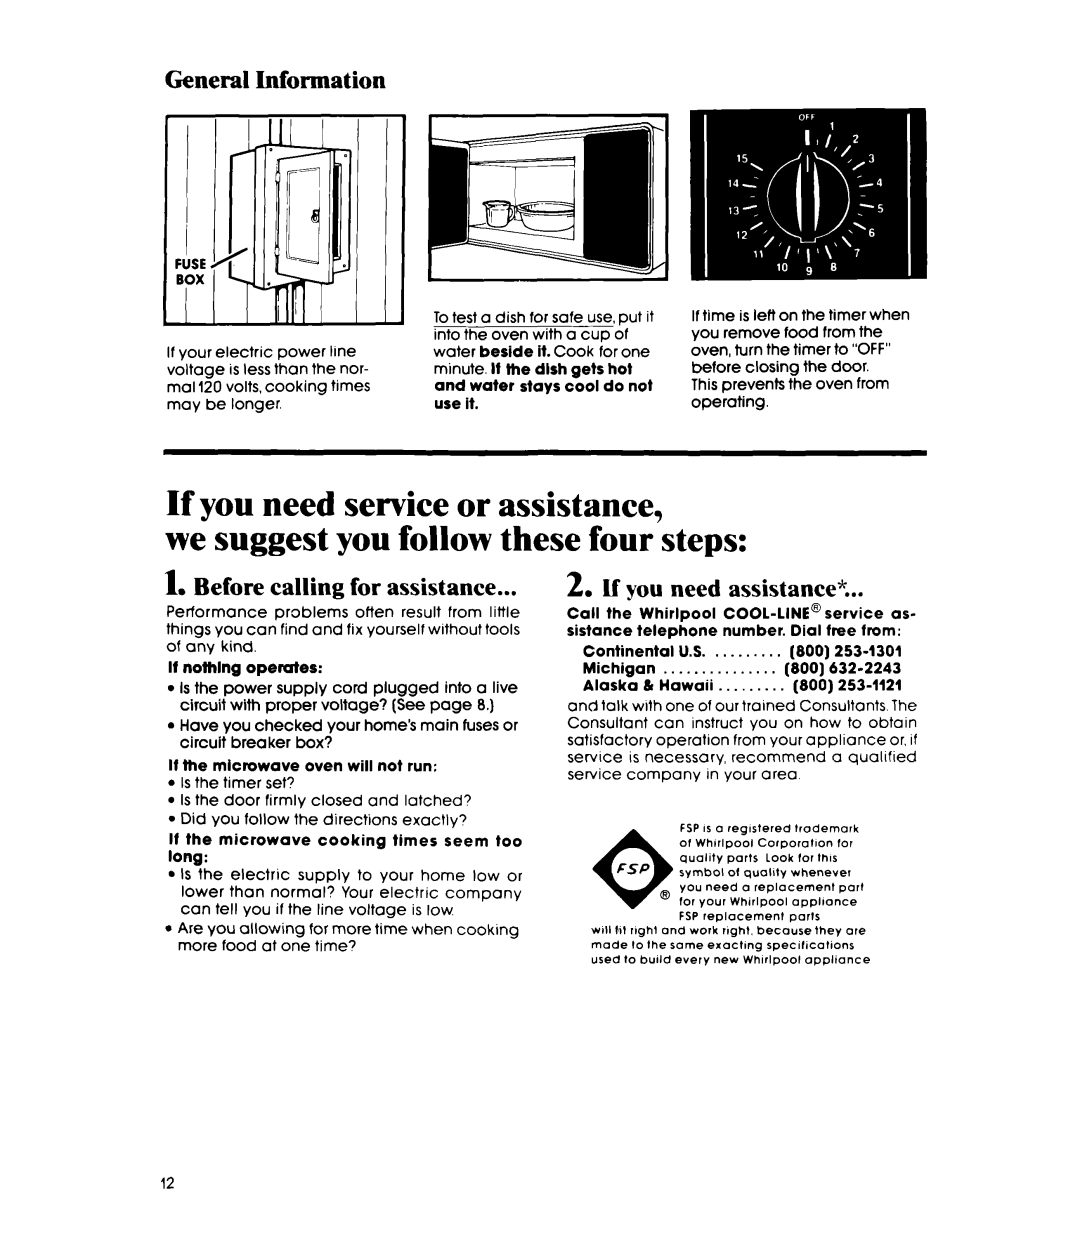 Whirlpool MW3OOOXP manual If you need service or assistance, we suggest you follow these four steps, General Information 